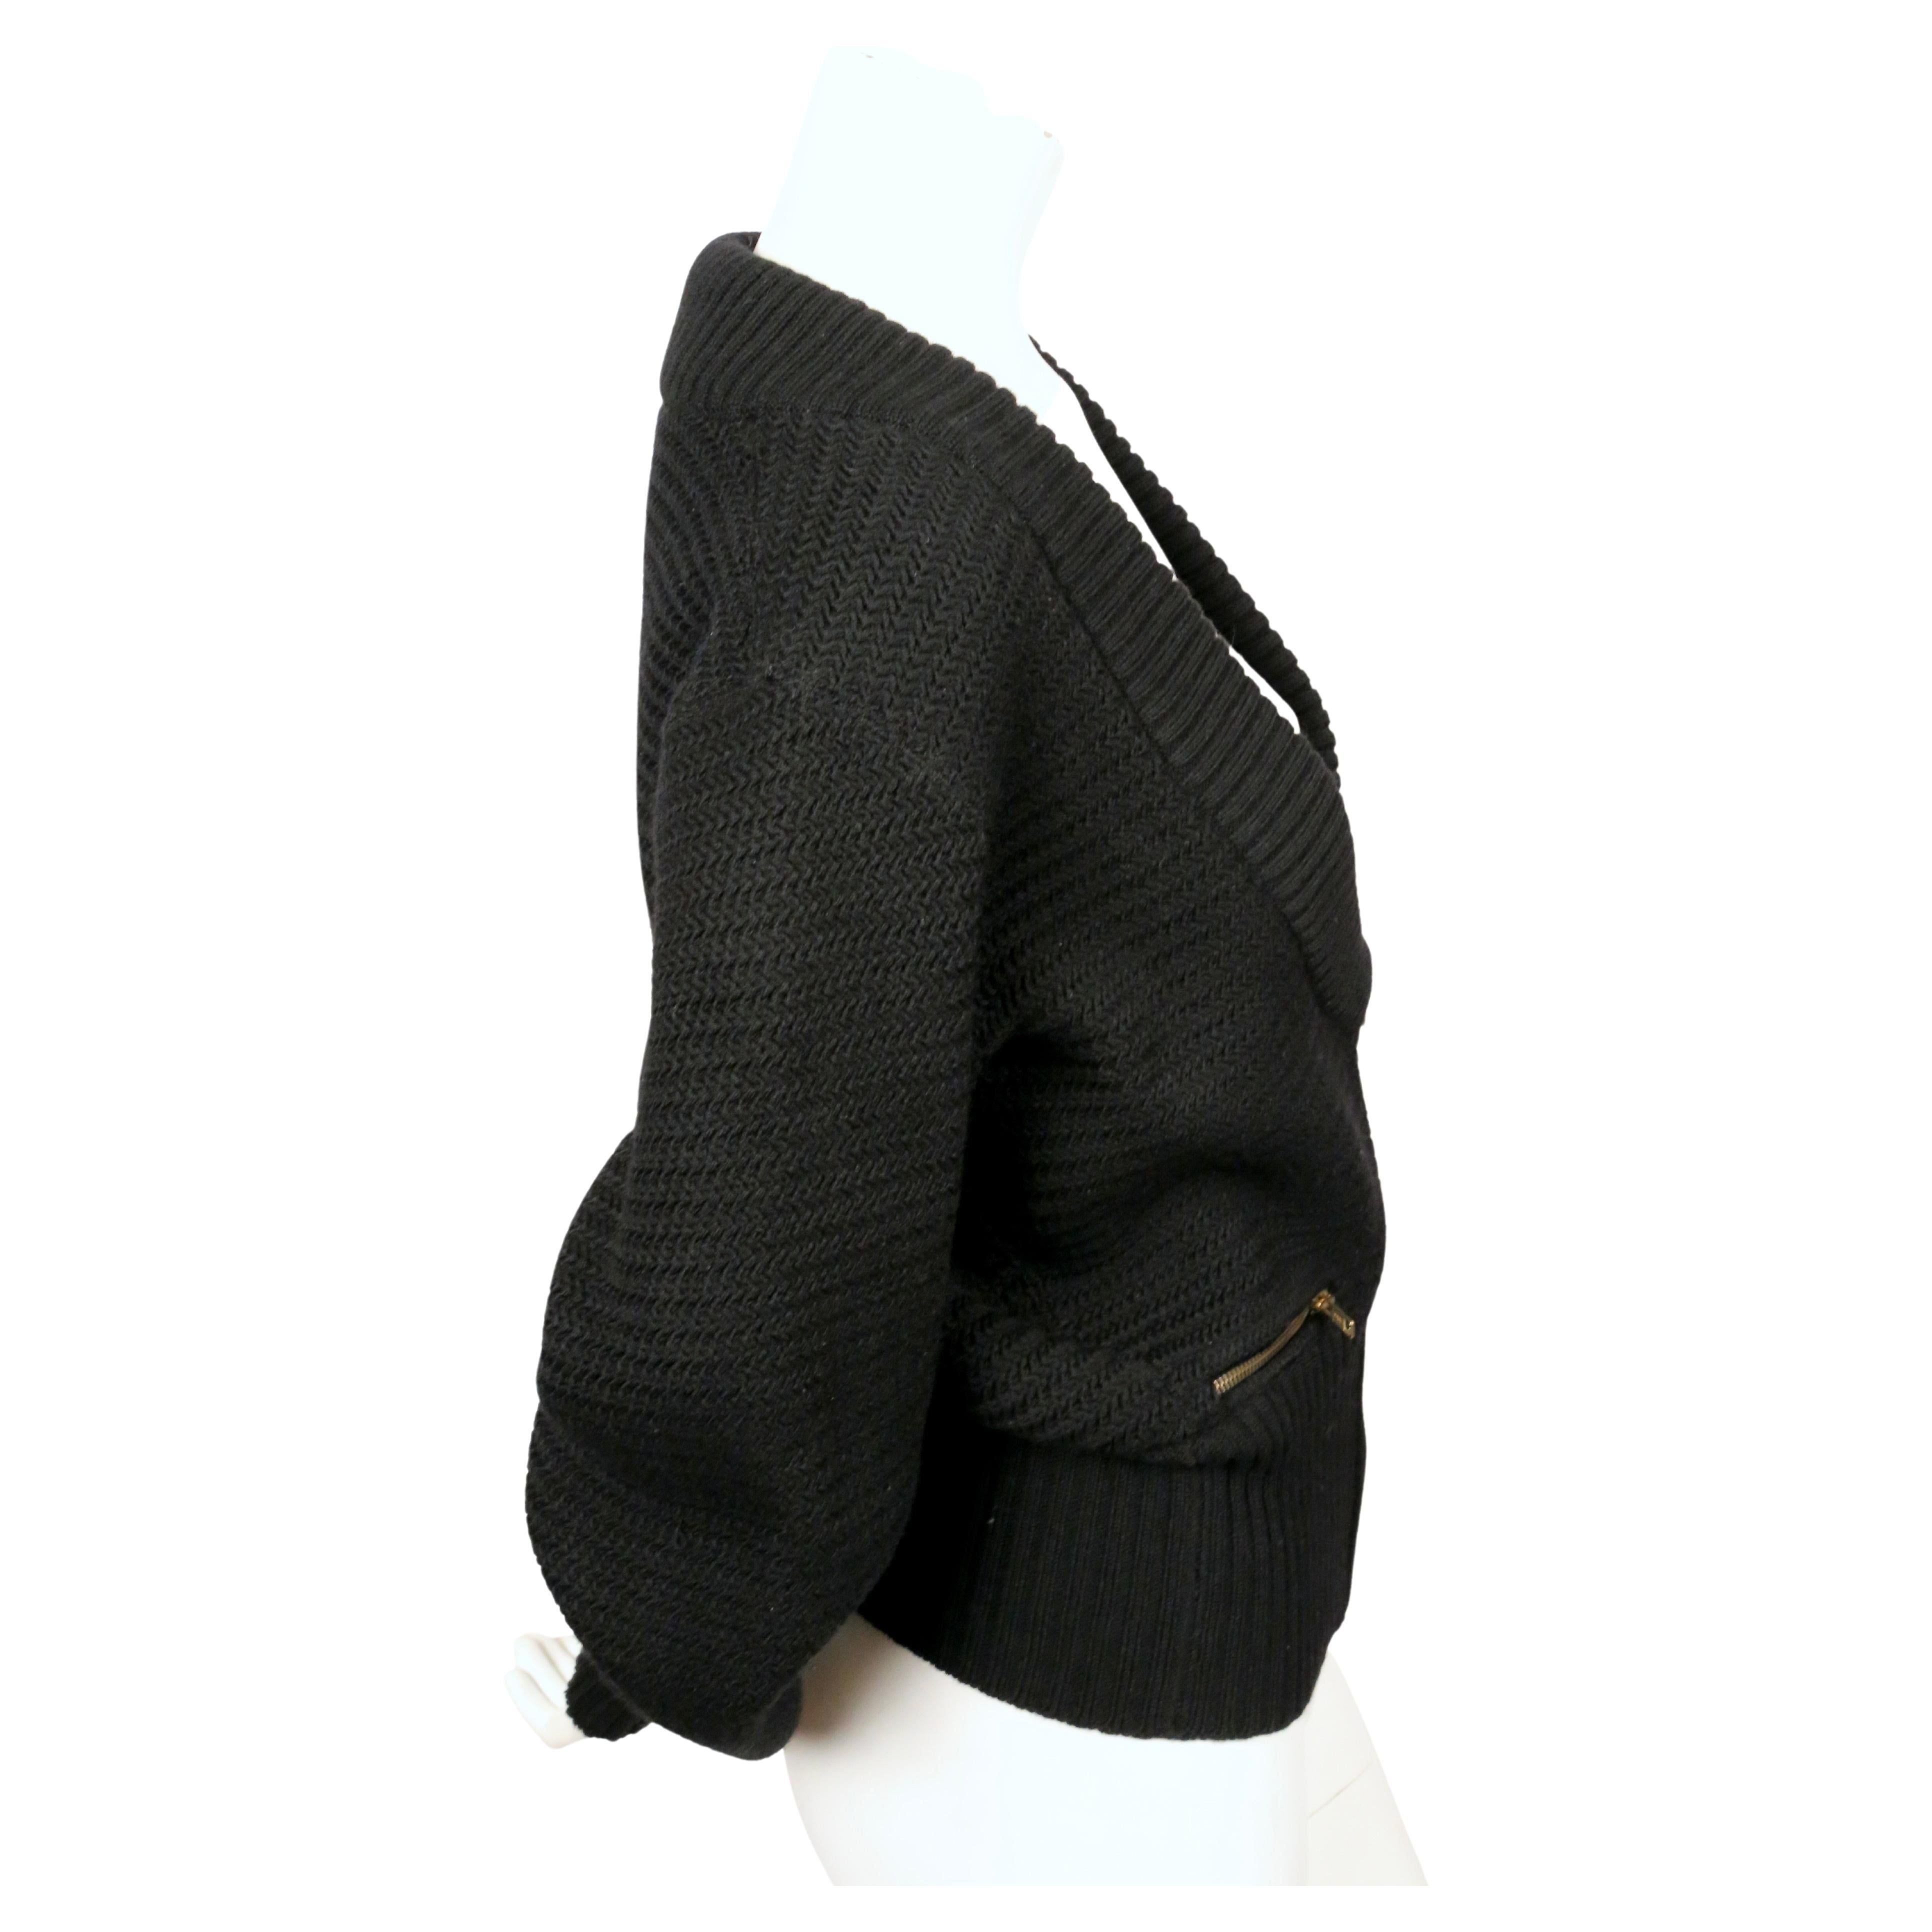 1986 AZZEDINE ALAIA heavy knit black RUNWAY cardigan sweater coat with zippers In Good Condition For Sale In San Fransisco, CA